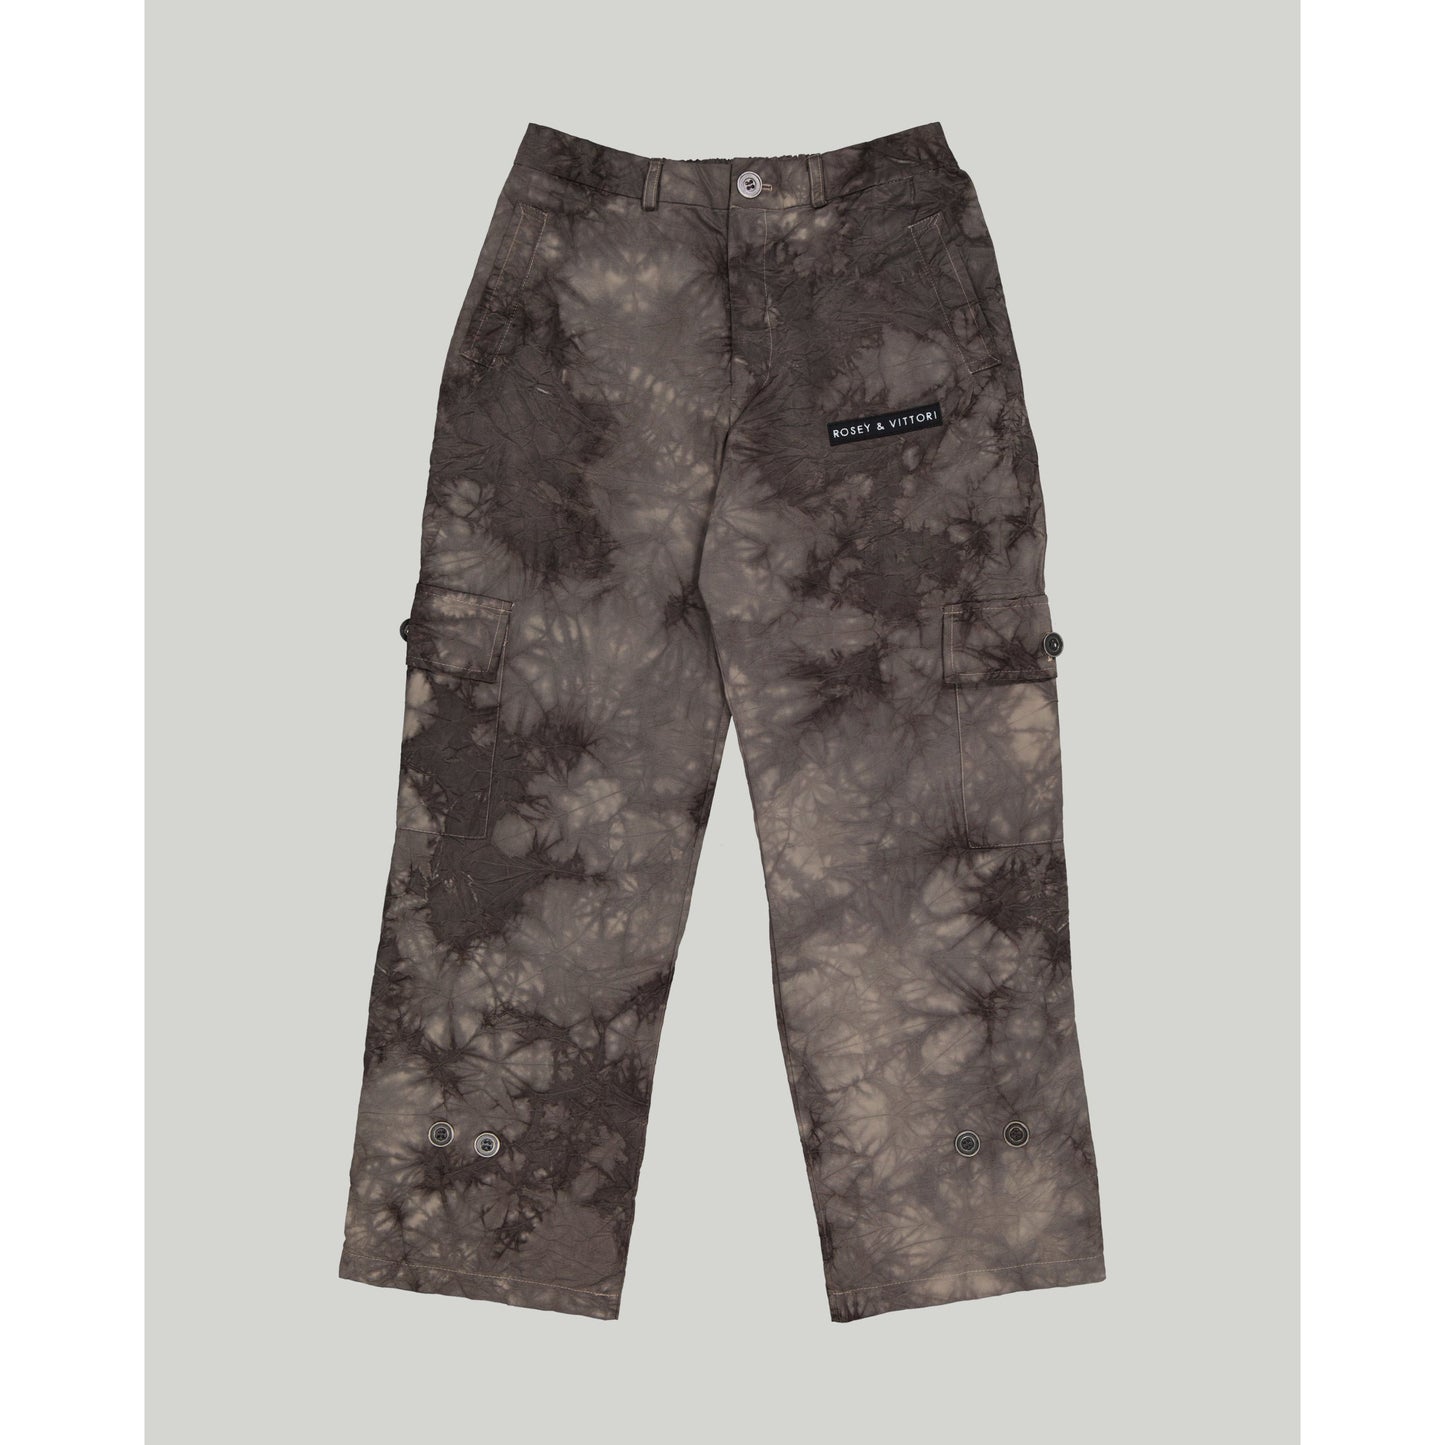 Cargo Pants in Stone with Black Crush Dye